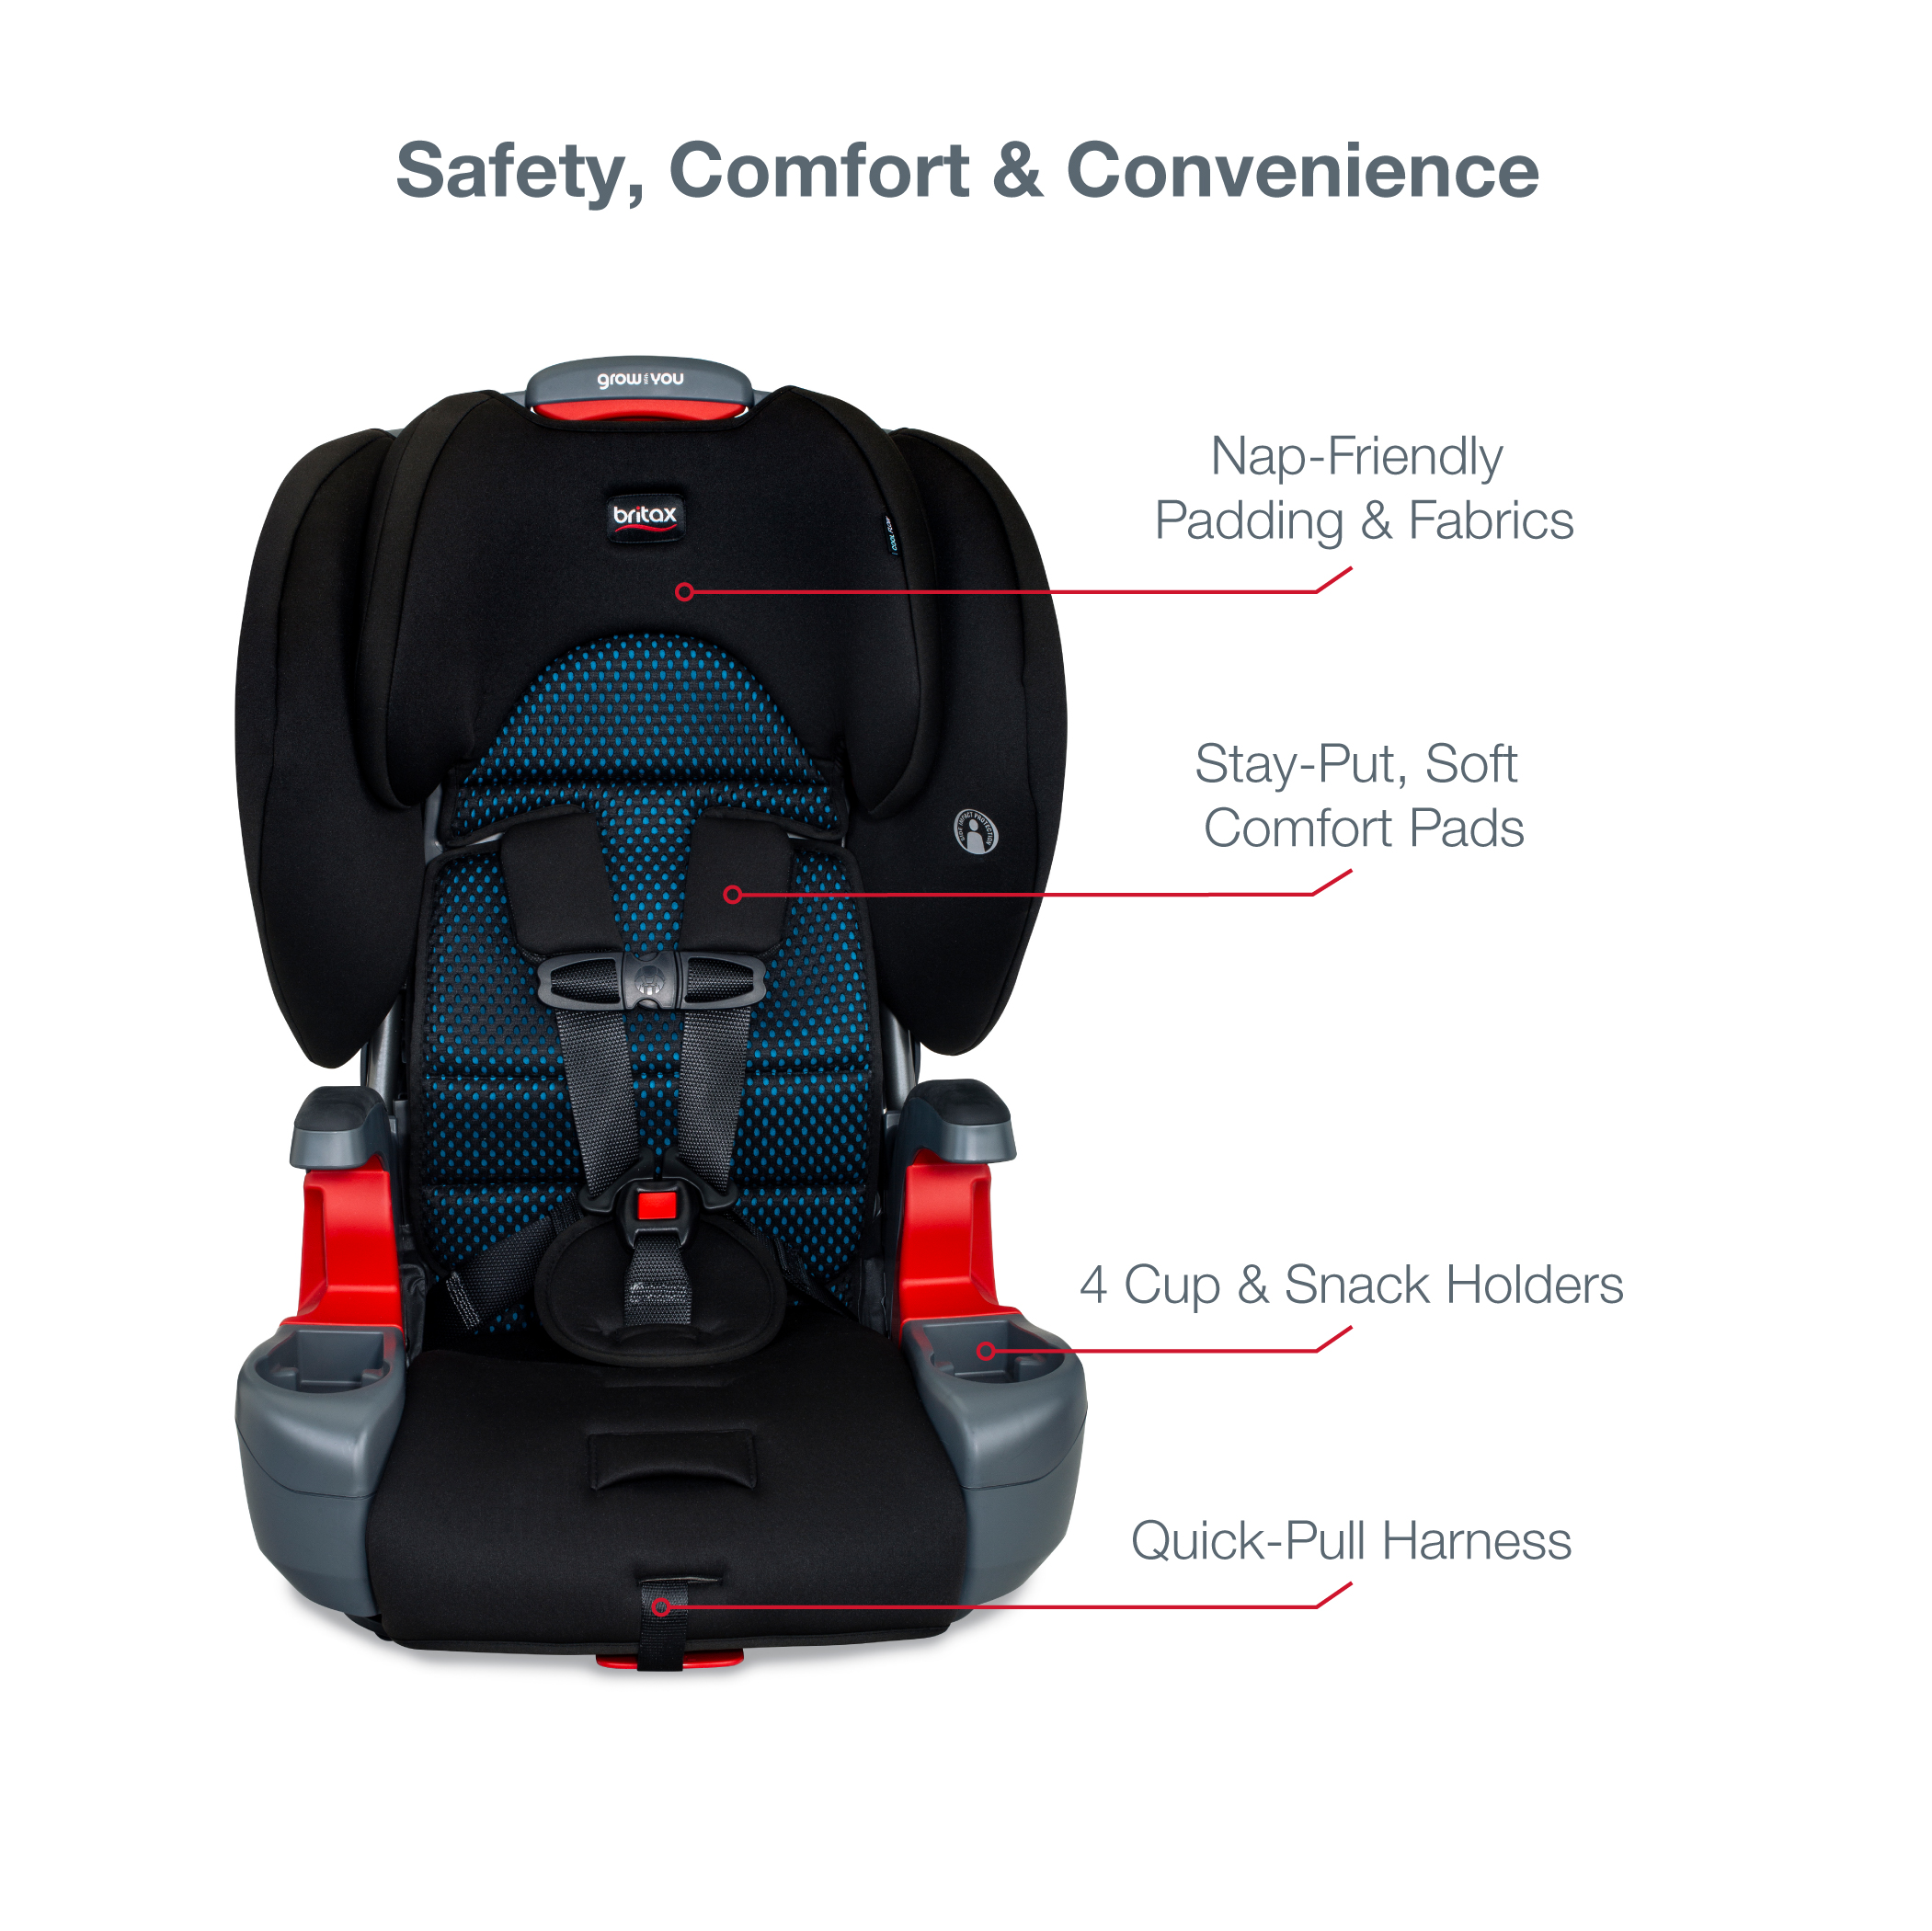 Britax Grow With You High-back Booster Car Seat, Black - image 5 of 13